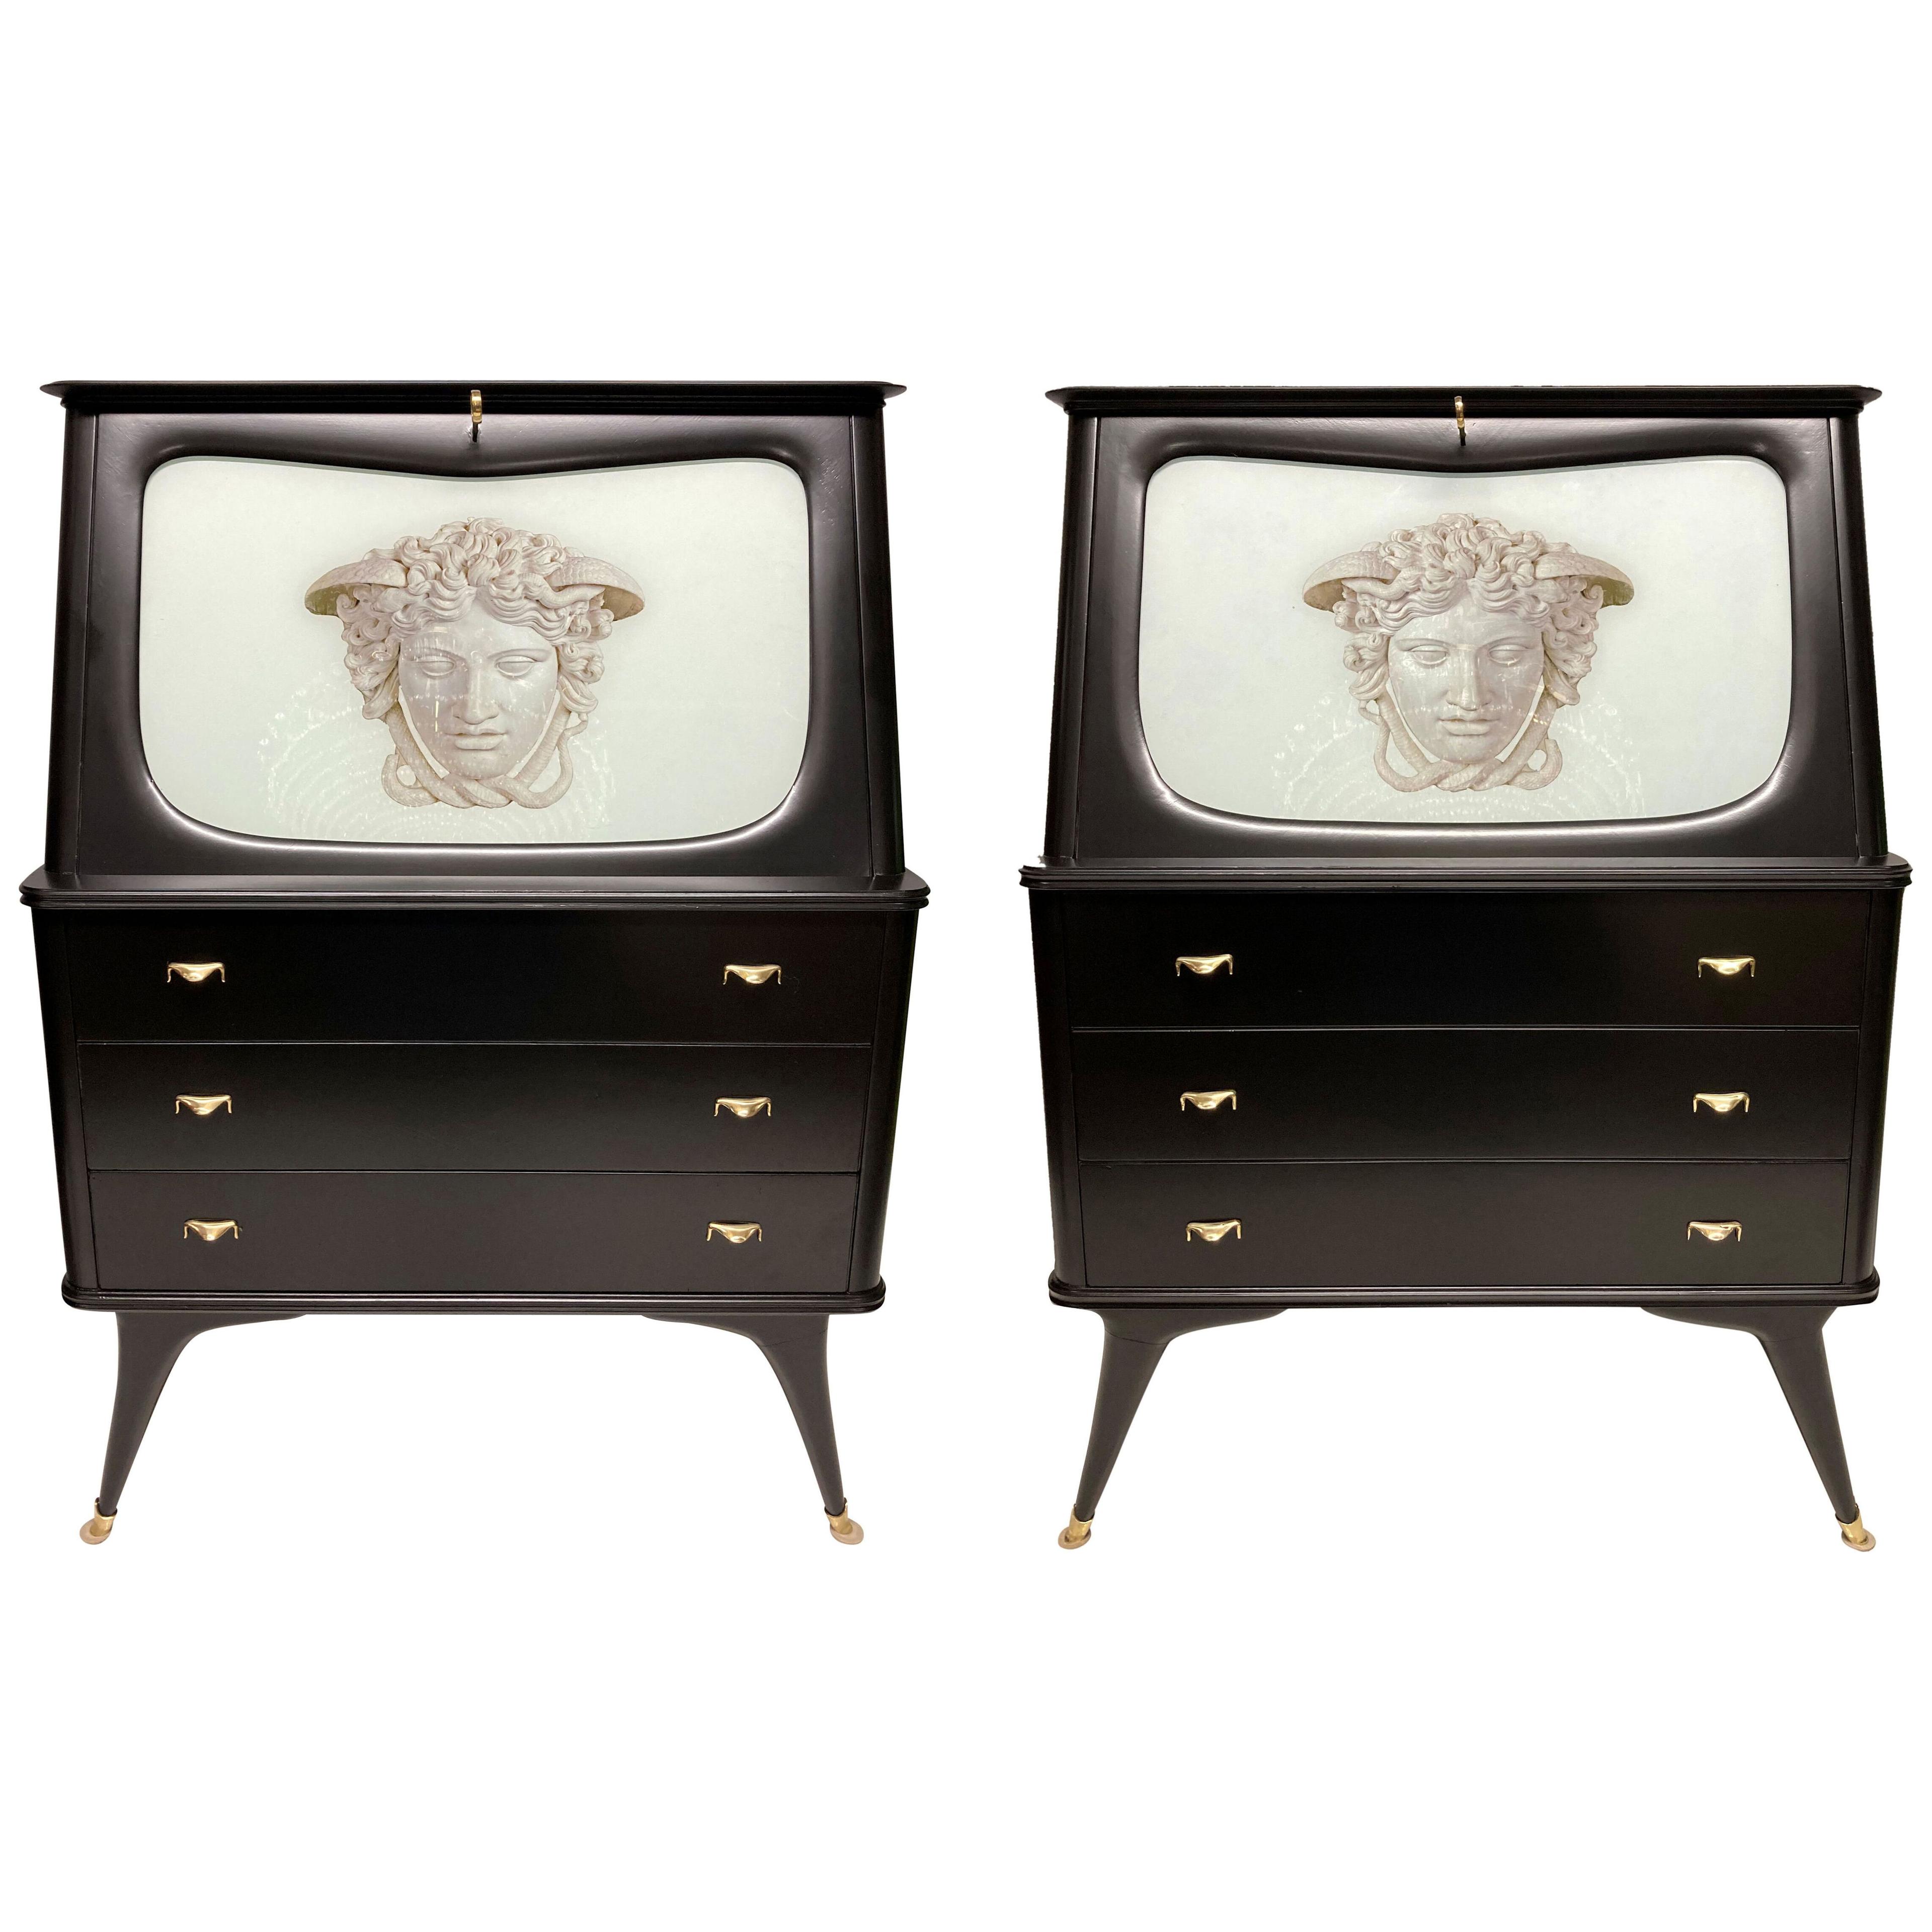 A PAIR OF BLACK LACQUERED MID-CENTURY SECRETAIRES BY PAOLO BUFFA